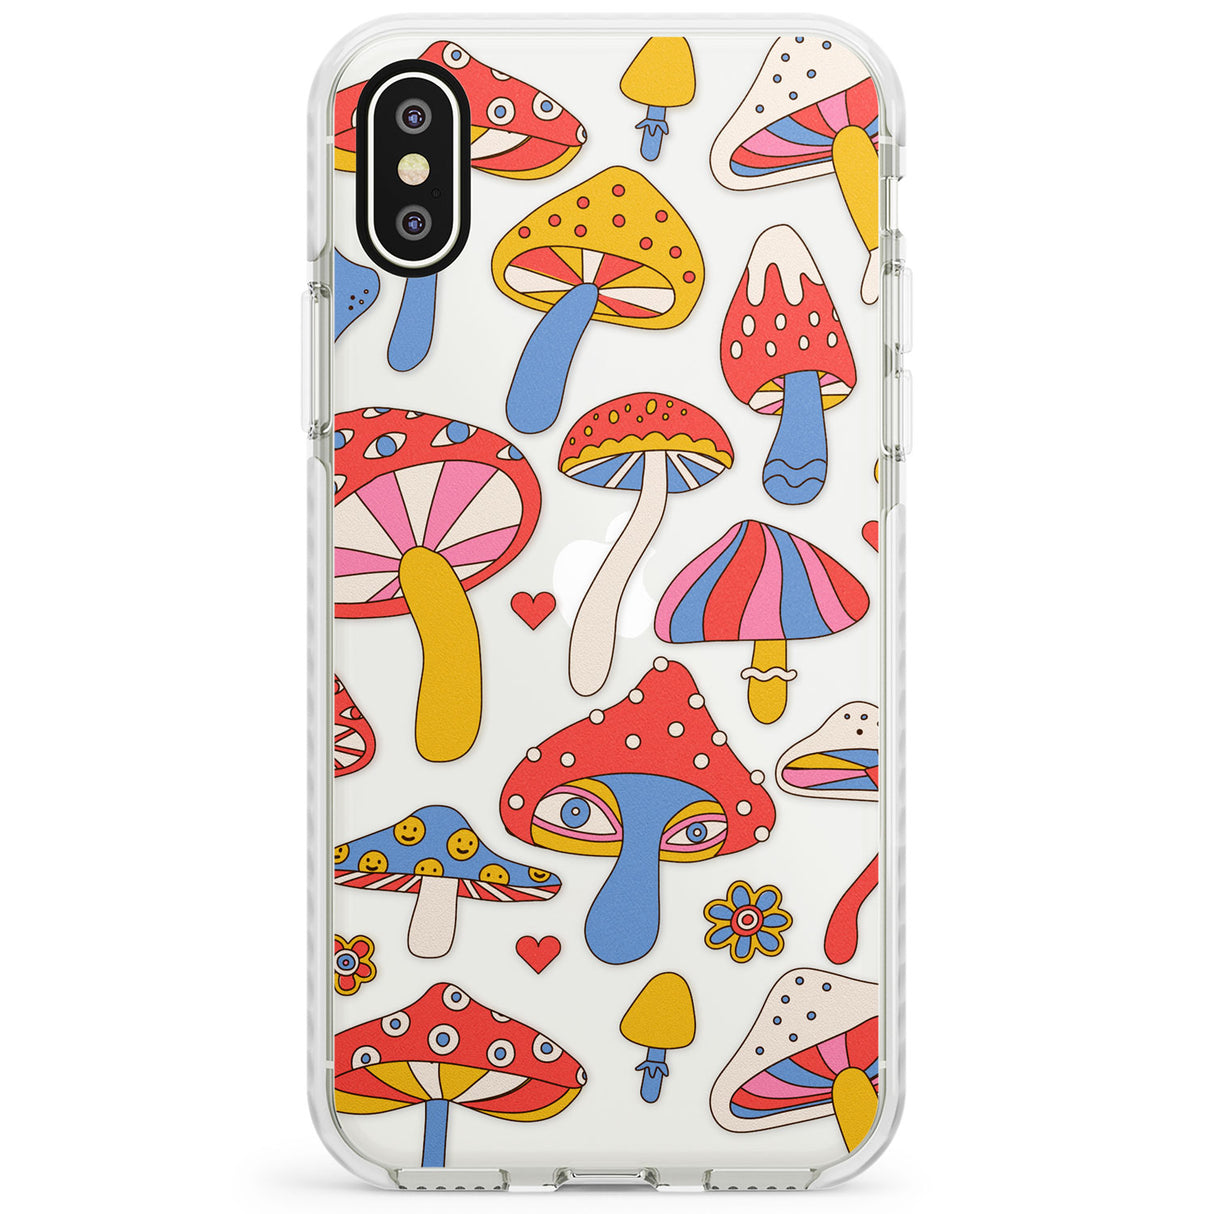 Vibrant Shrooms Impact Phone Case for iPhone X XS Max XR